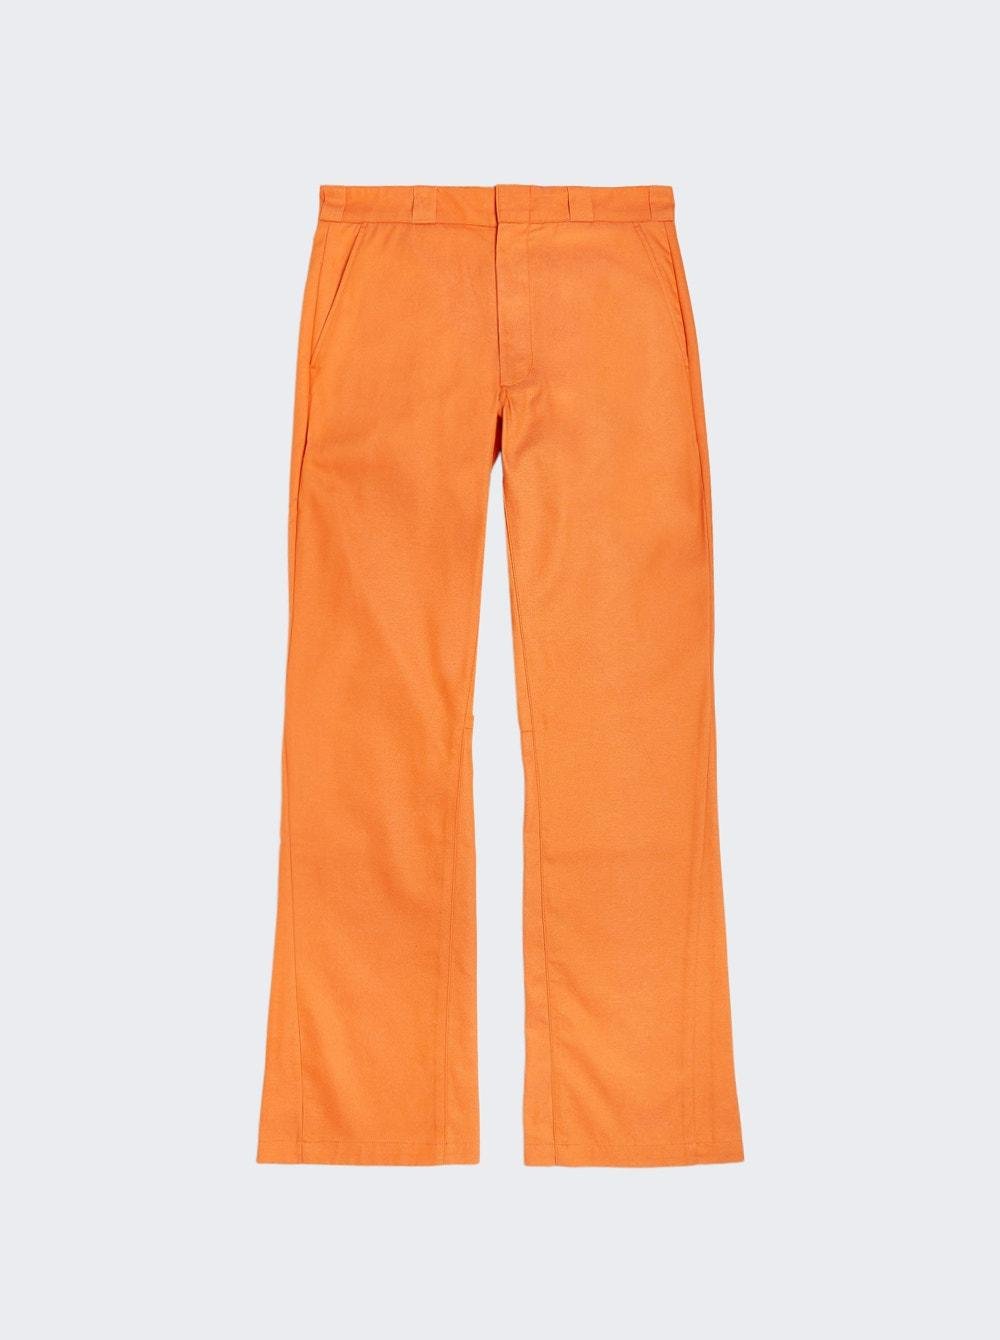 La Chino Flares Pants Orange  | The Webster by GALLERY DEPT.